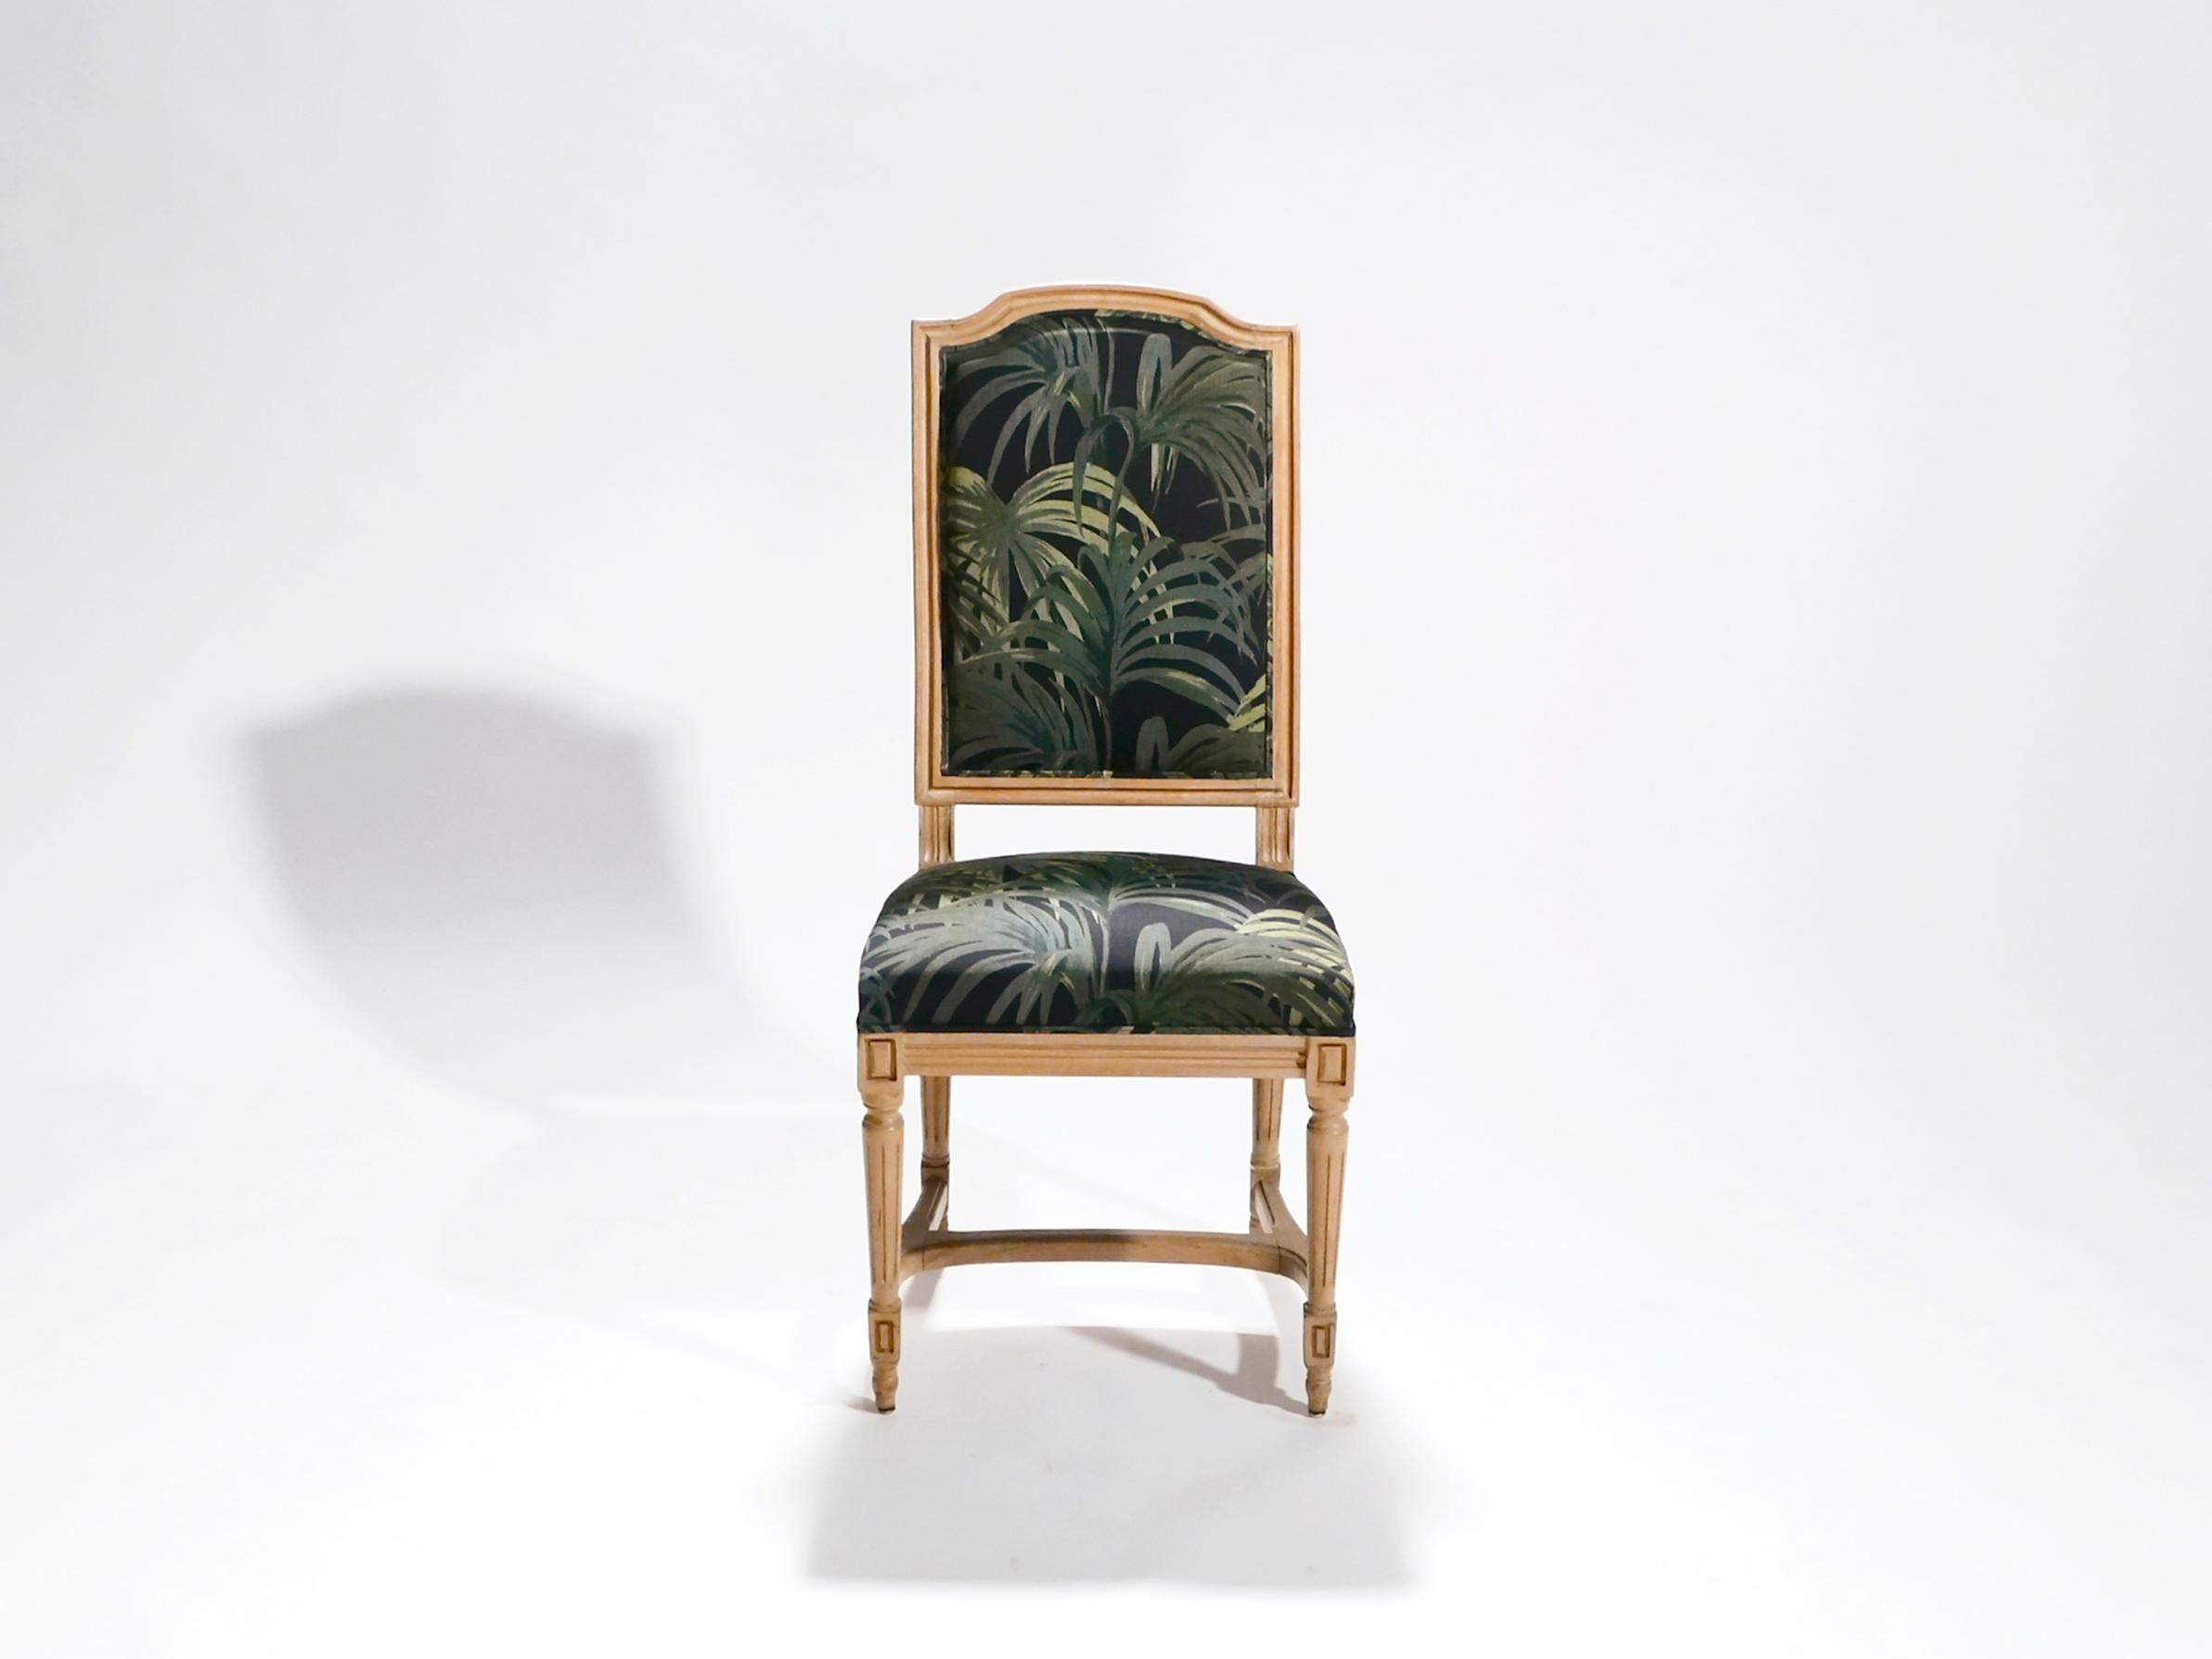 New colorful upholstery is a great contrast to the beautiful old oak in these chairs. The lovely patina evident on the oak feet and structure is enough to convey the half-century of history in this set of 6, so the upholstery, in a fresh palm